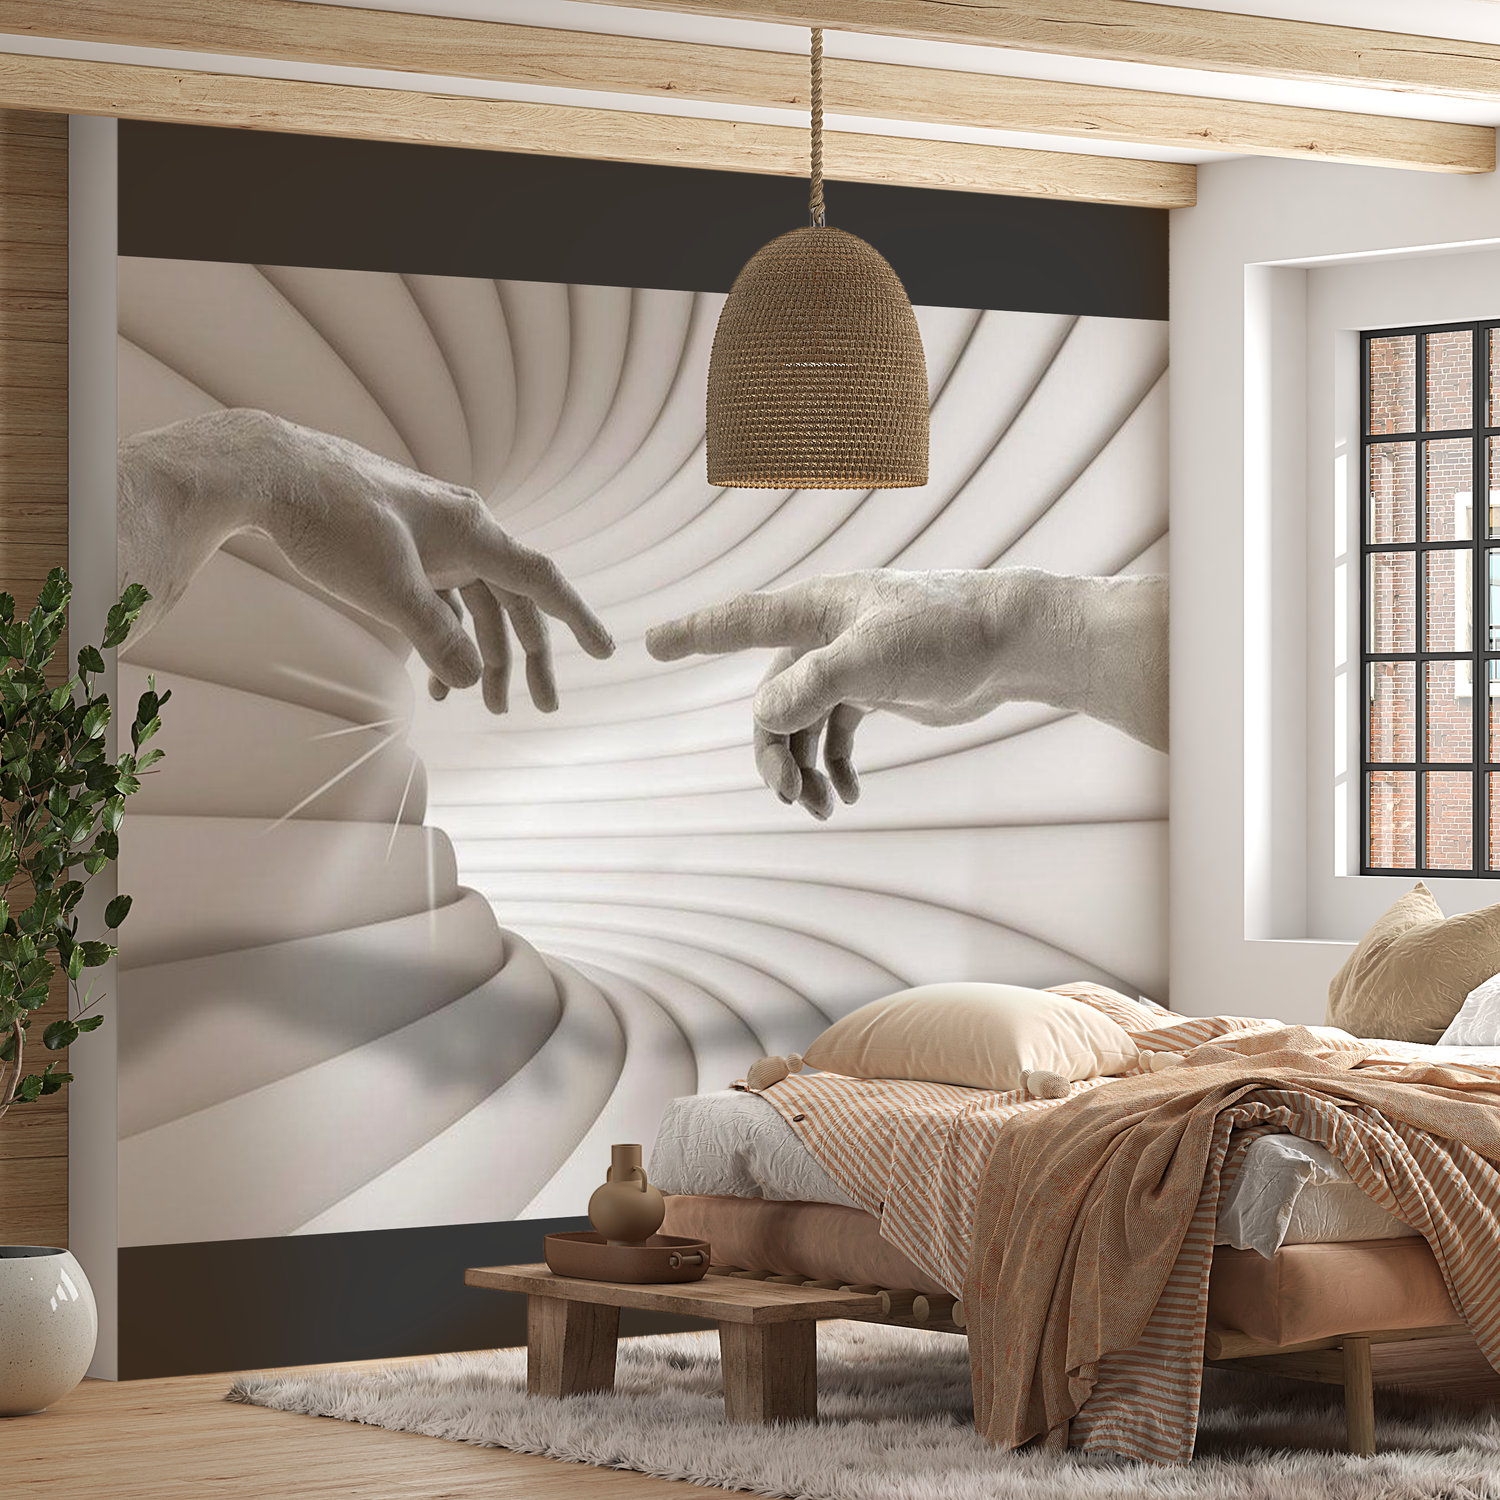 3D Illusion Wallpaper Wall Mural - Touch 39"Wx27"H